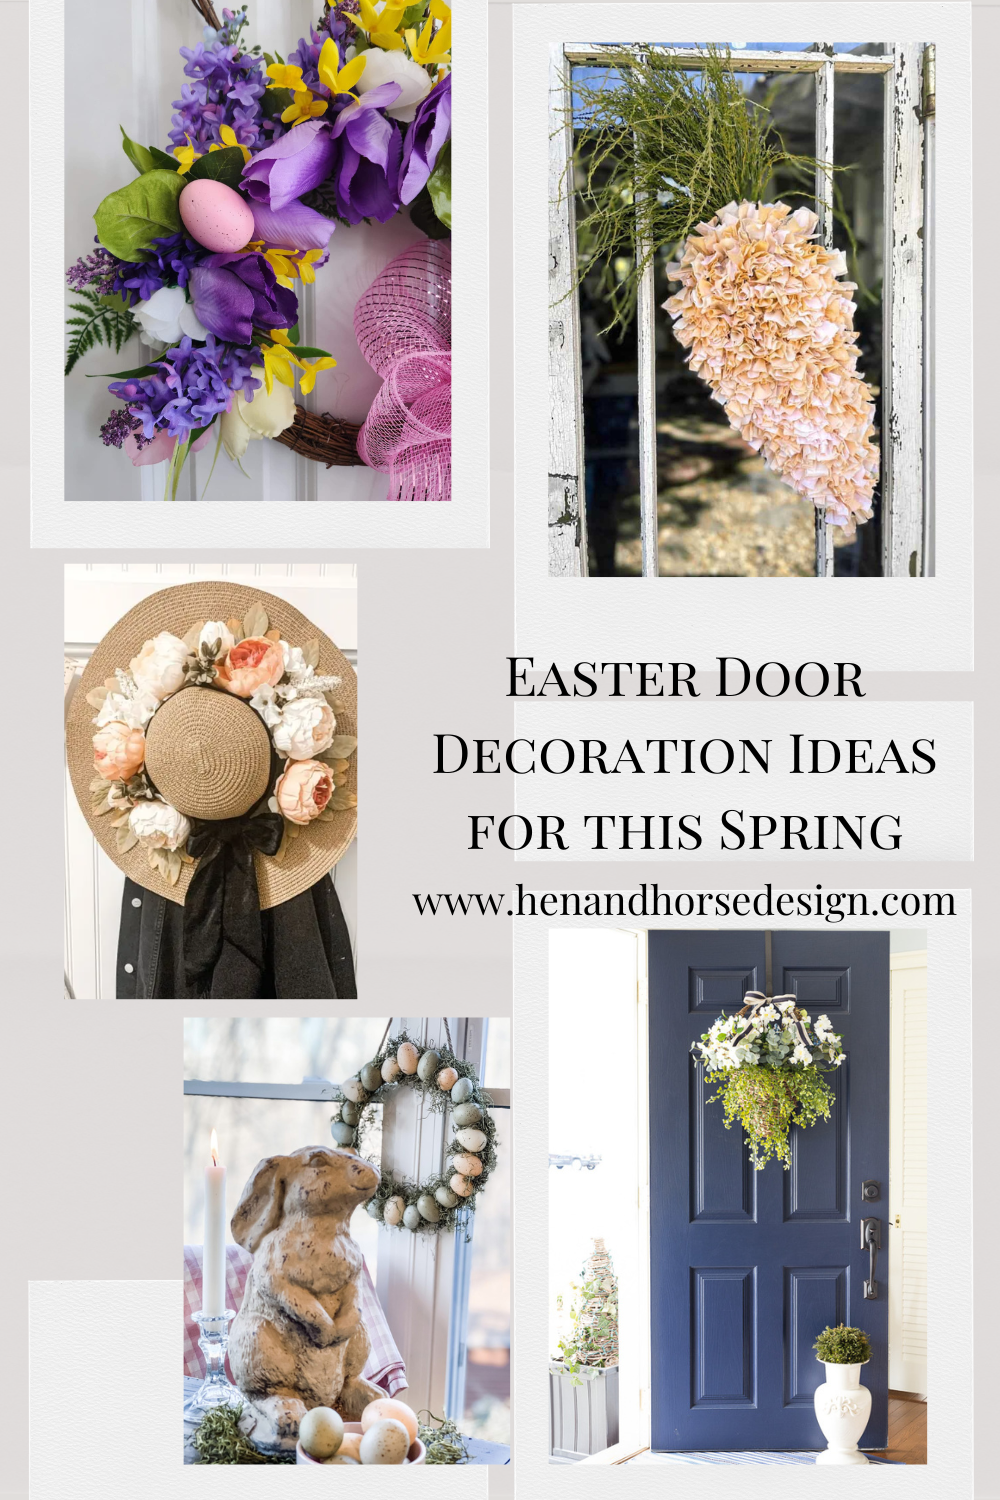 Easter Door Decoration Ideas for this Spring